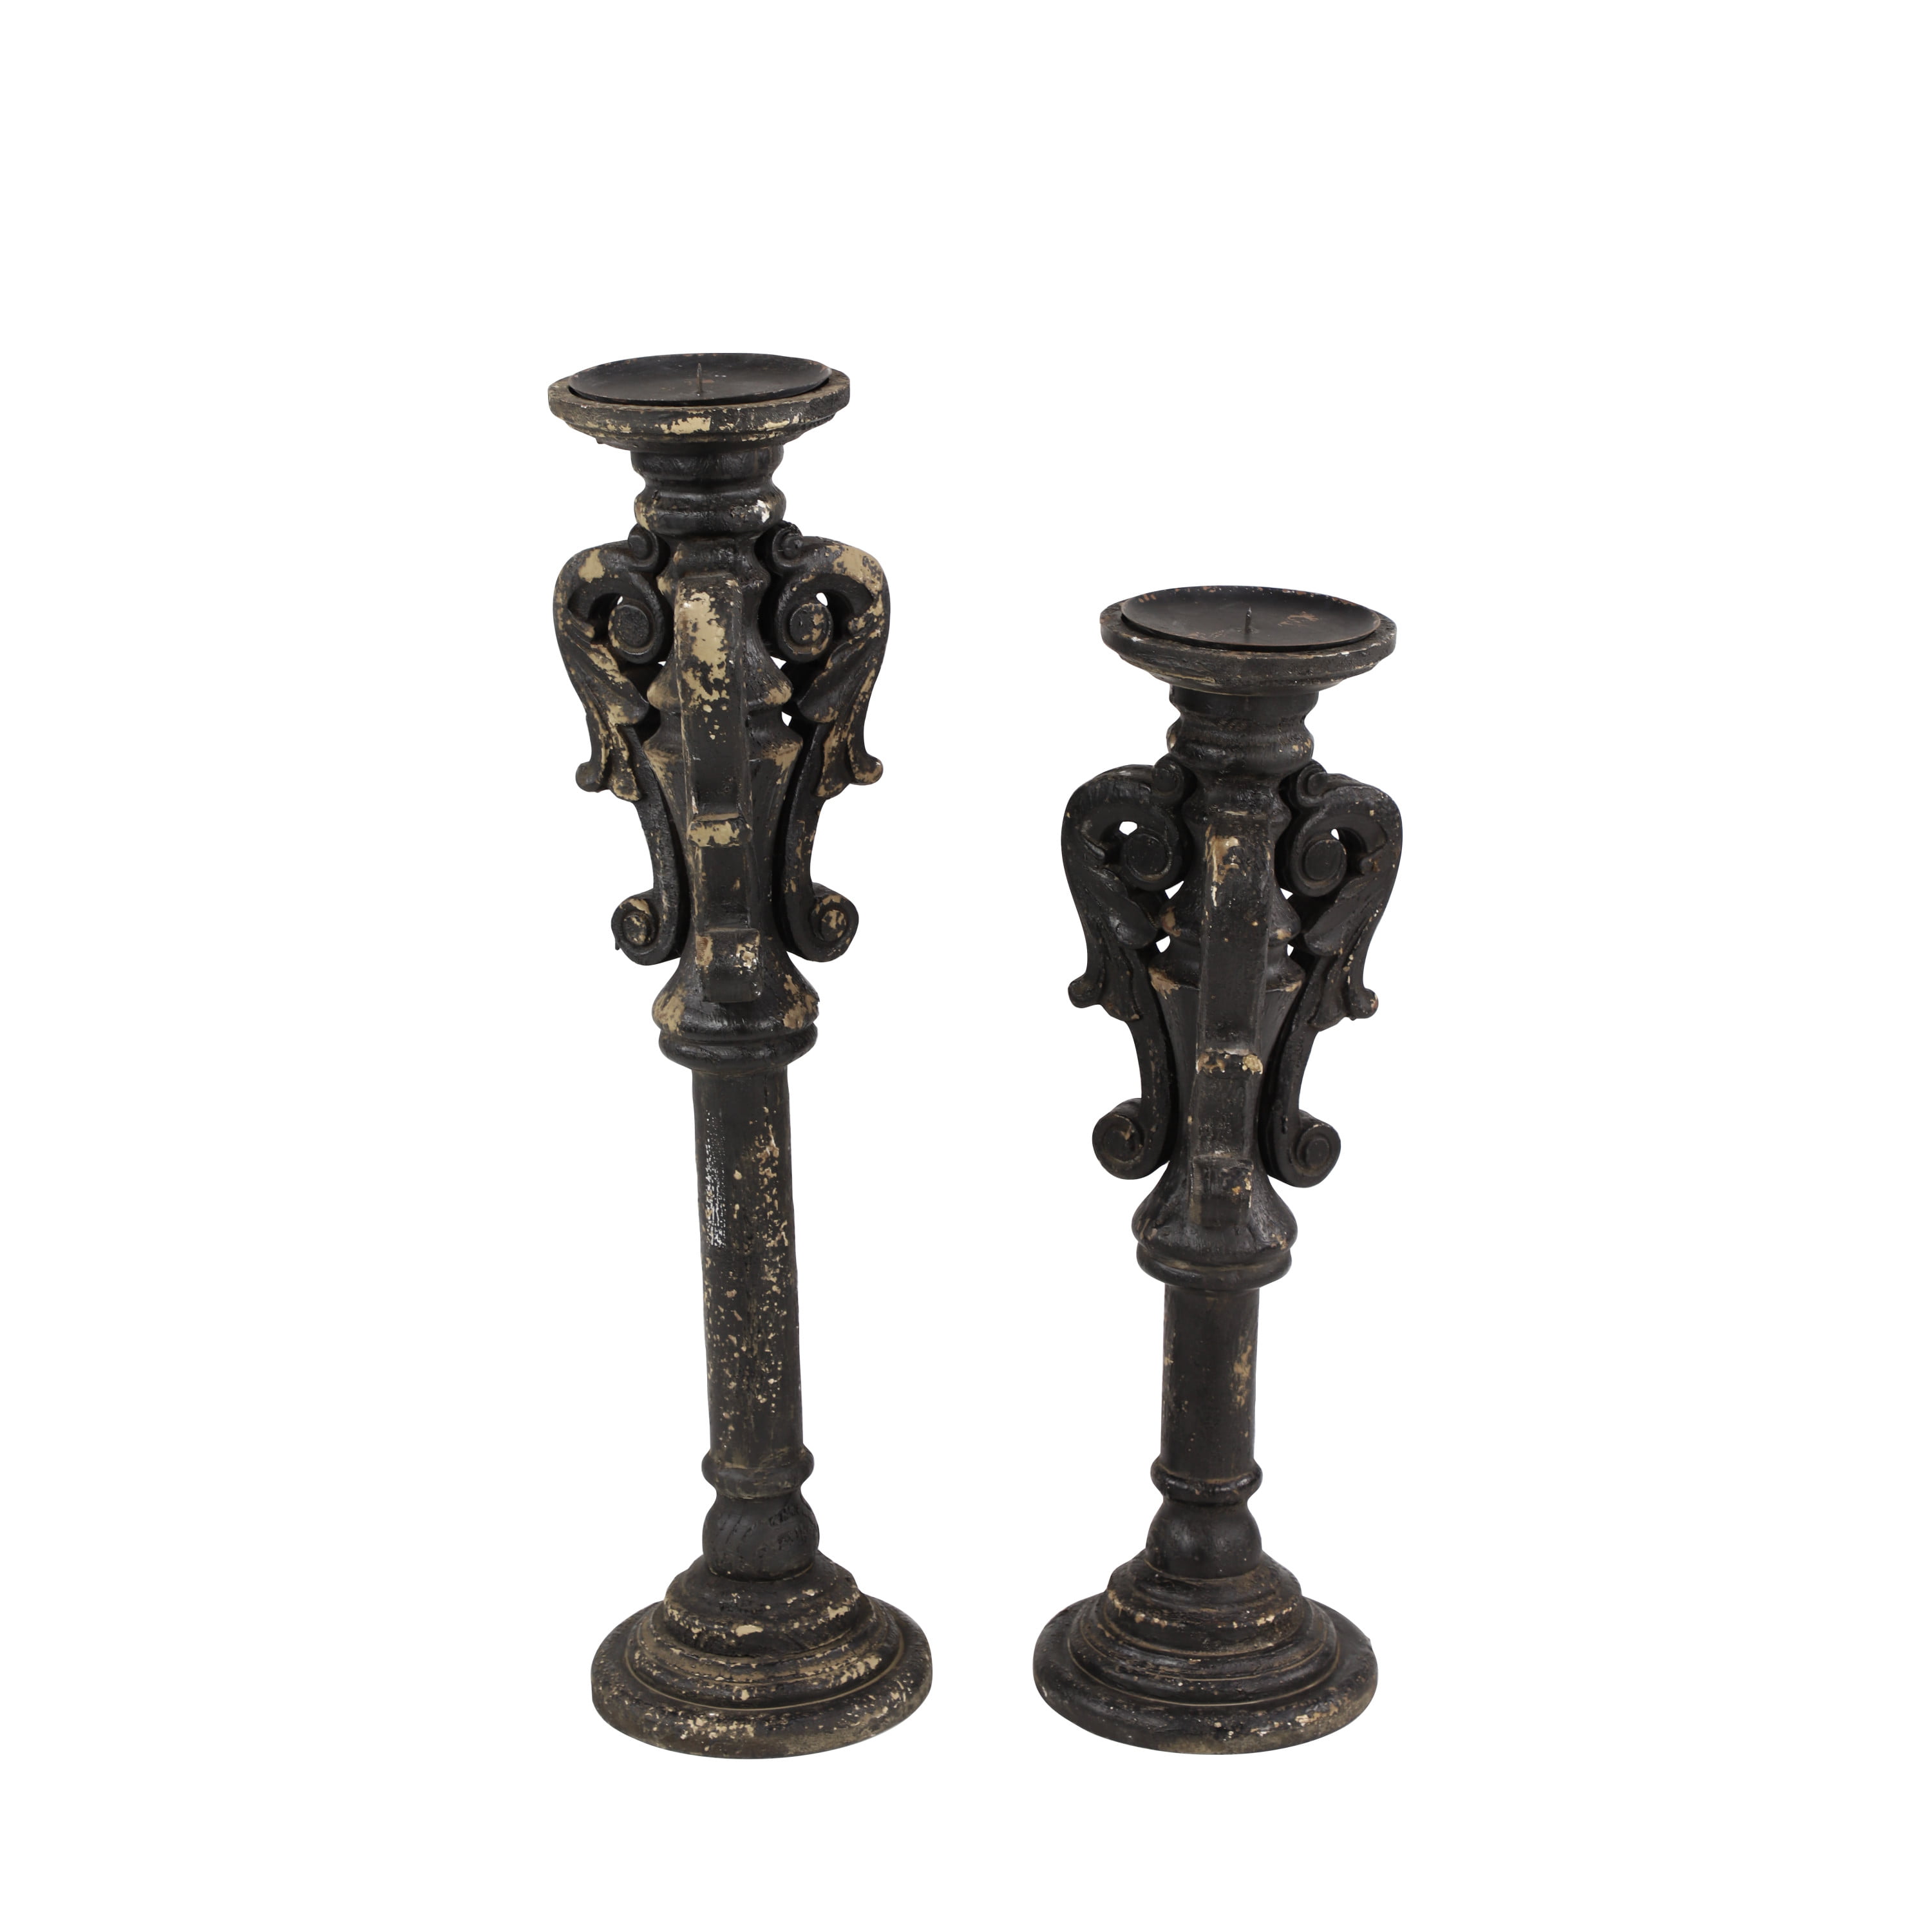 27” H 2 Antique Style Wrought Iron Pillar Candleholders Distressed Finish 22” 